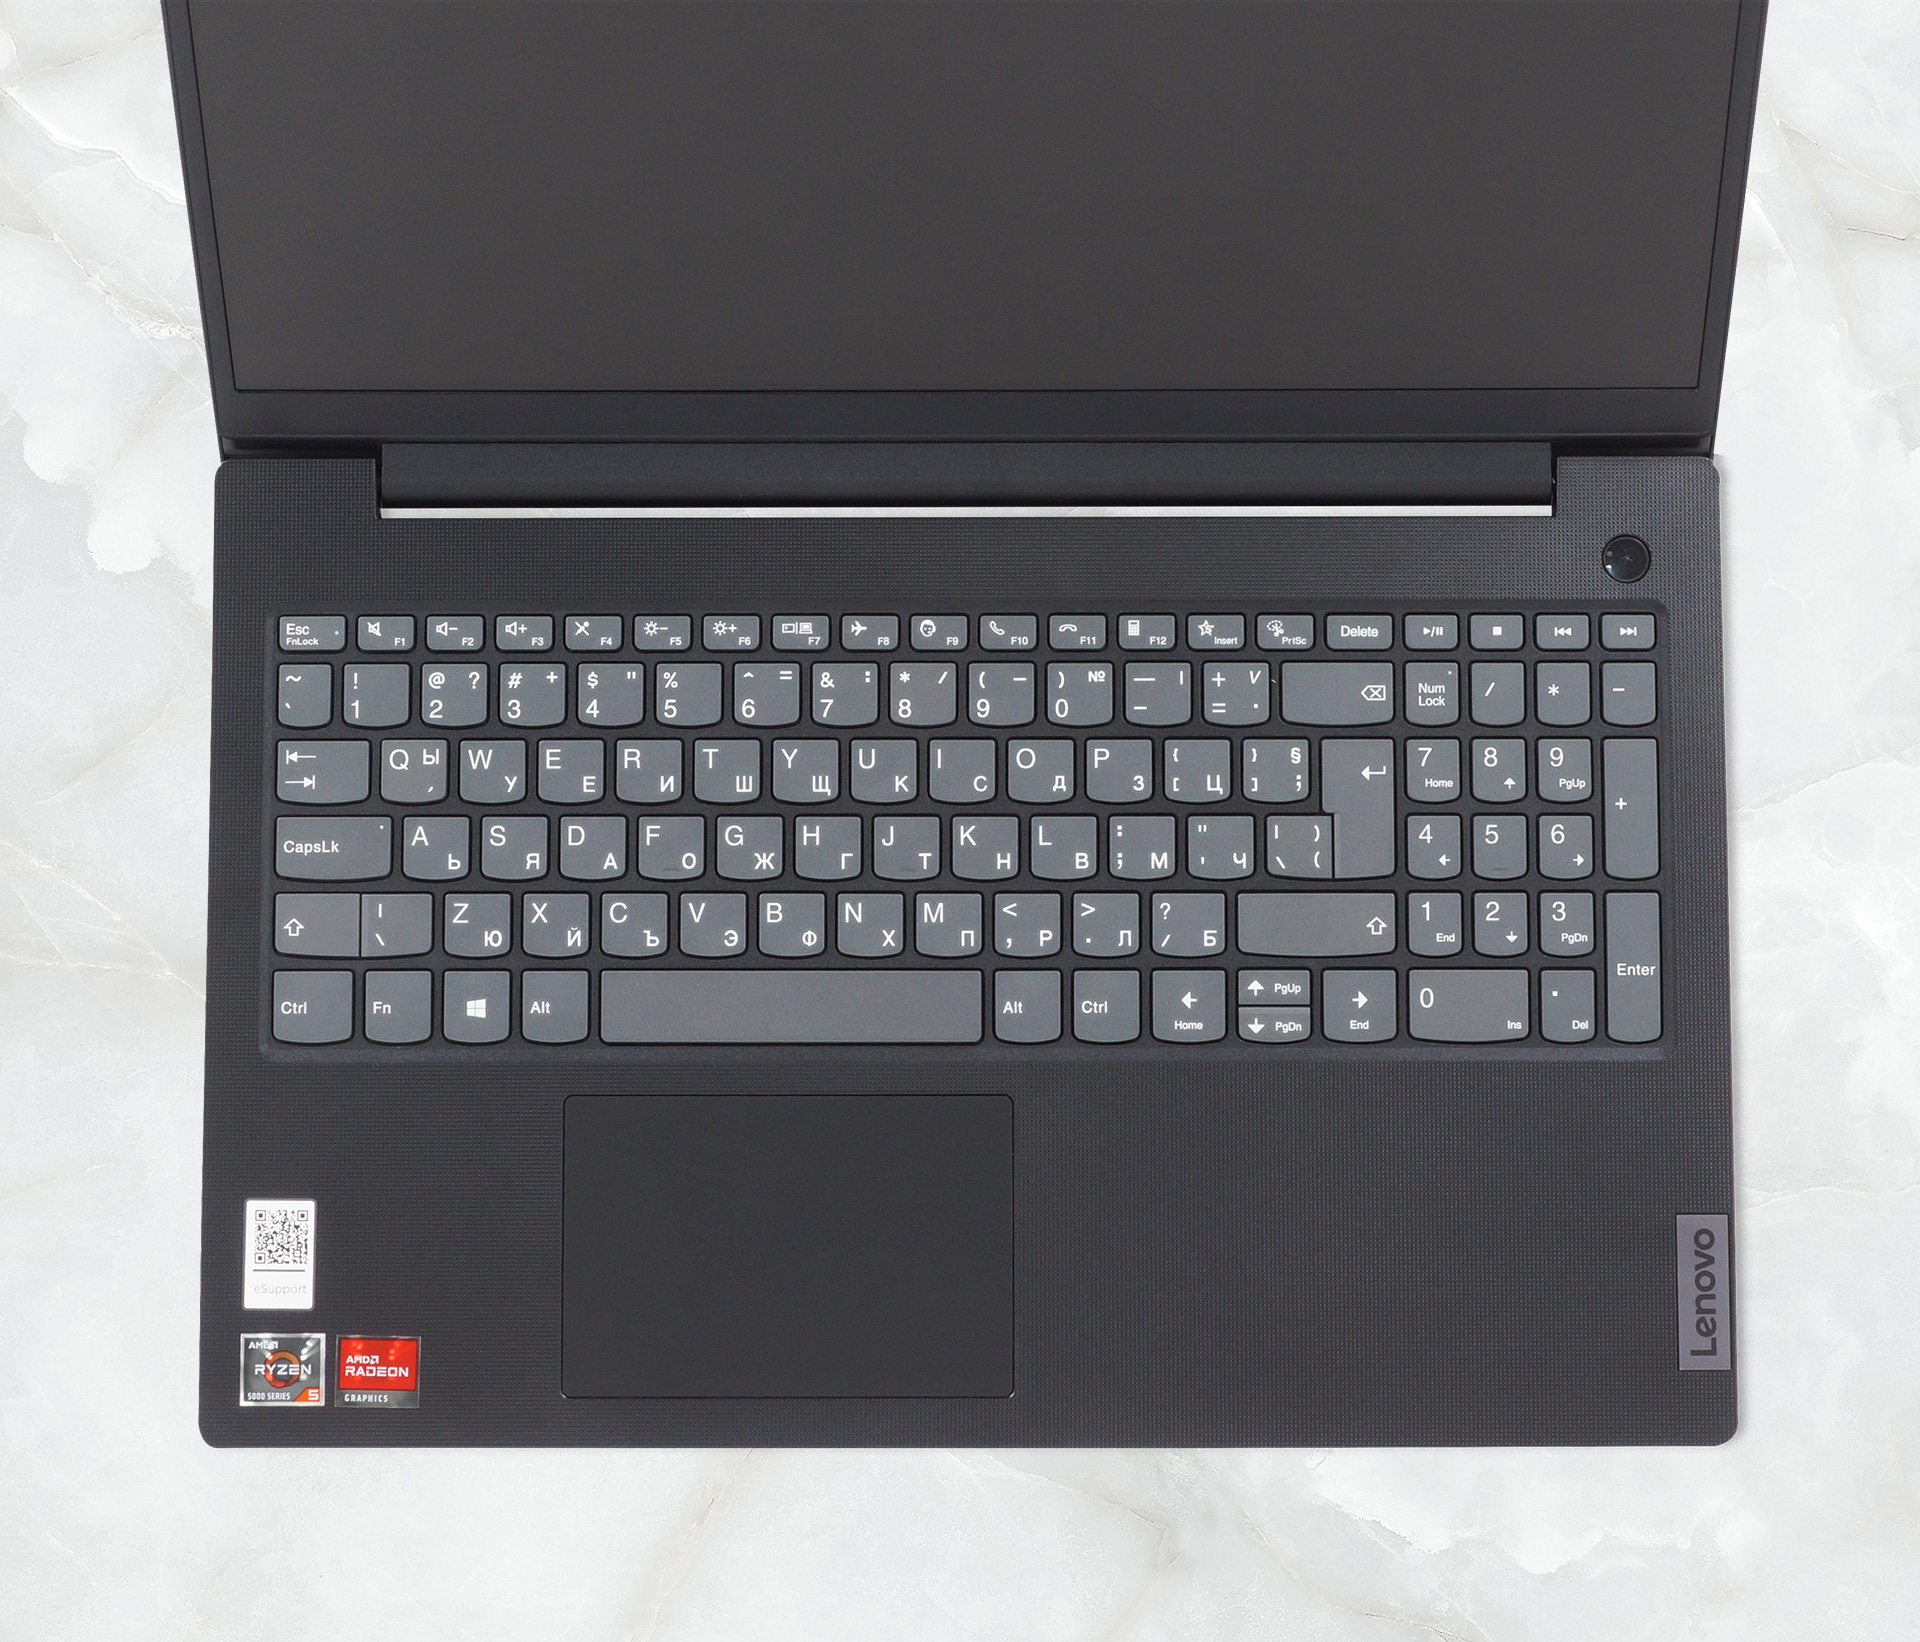 Lenovo V15 Gen 2 review - your bank account is gonna like it